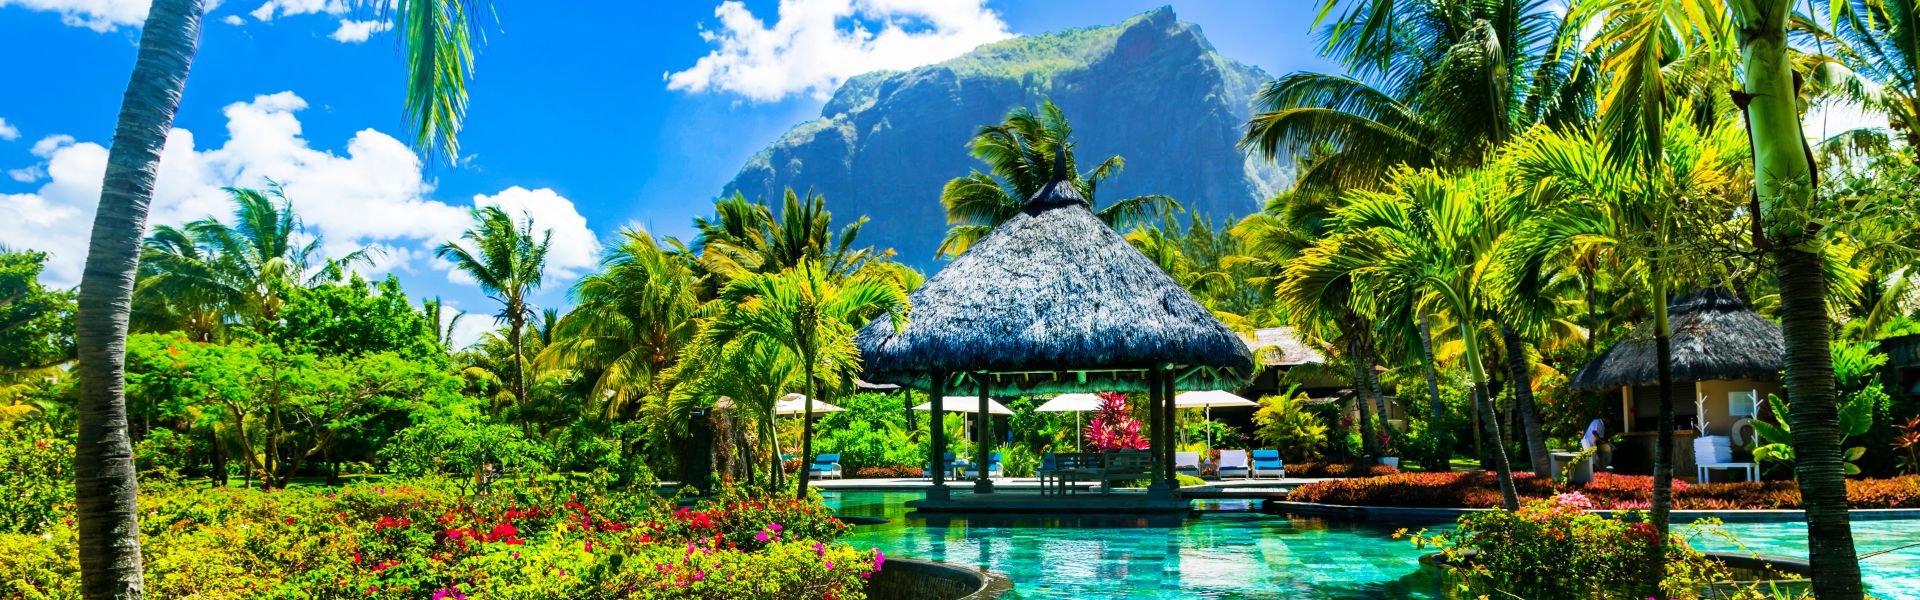 You want to spend a dream holiday in Mauritius in an idyllic setting with its long white sandy beaches, shiny turquoise blue lagoons, all under a beautiful blue sky, but you are hesitating about the type of accommodation in which to spend those days of rest and fun without having to worry about anything? Here, we tell you everything you need to know about Mauritius resort hotels; resort hotels are hotel complexes that offer their customers leisure activities and catering in addition to high-class accommodation.